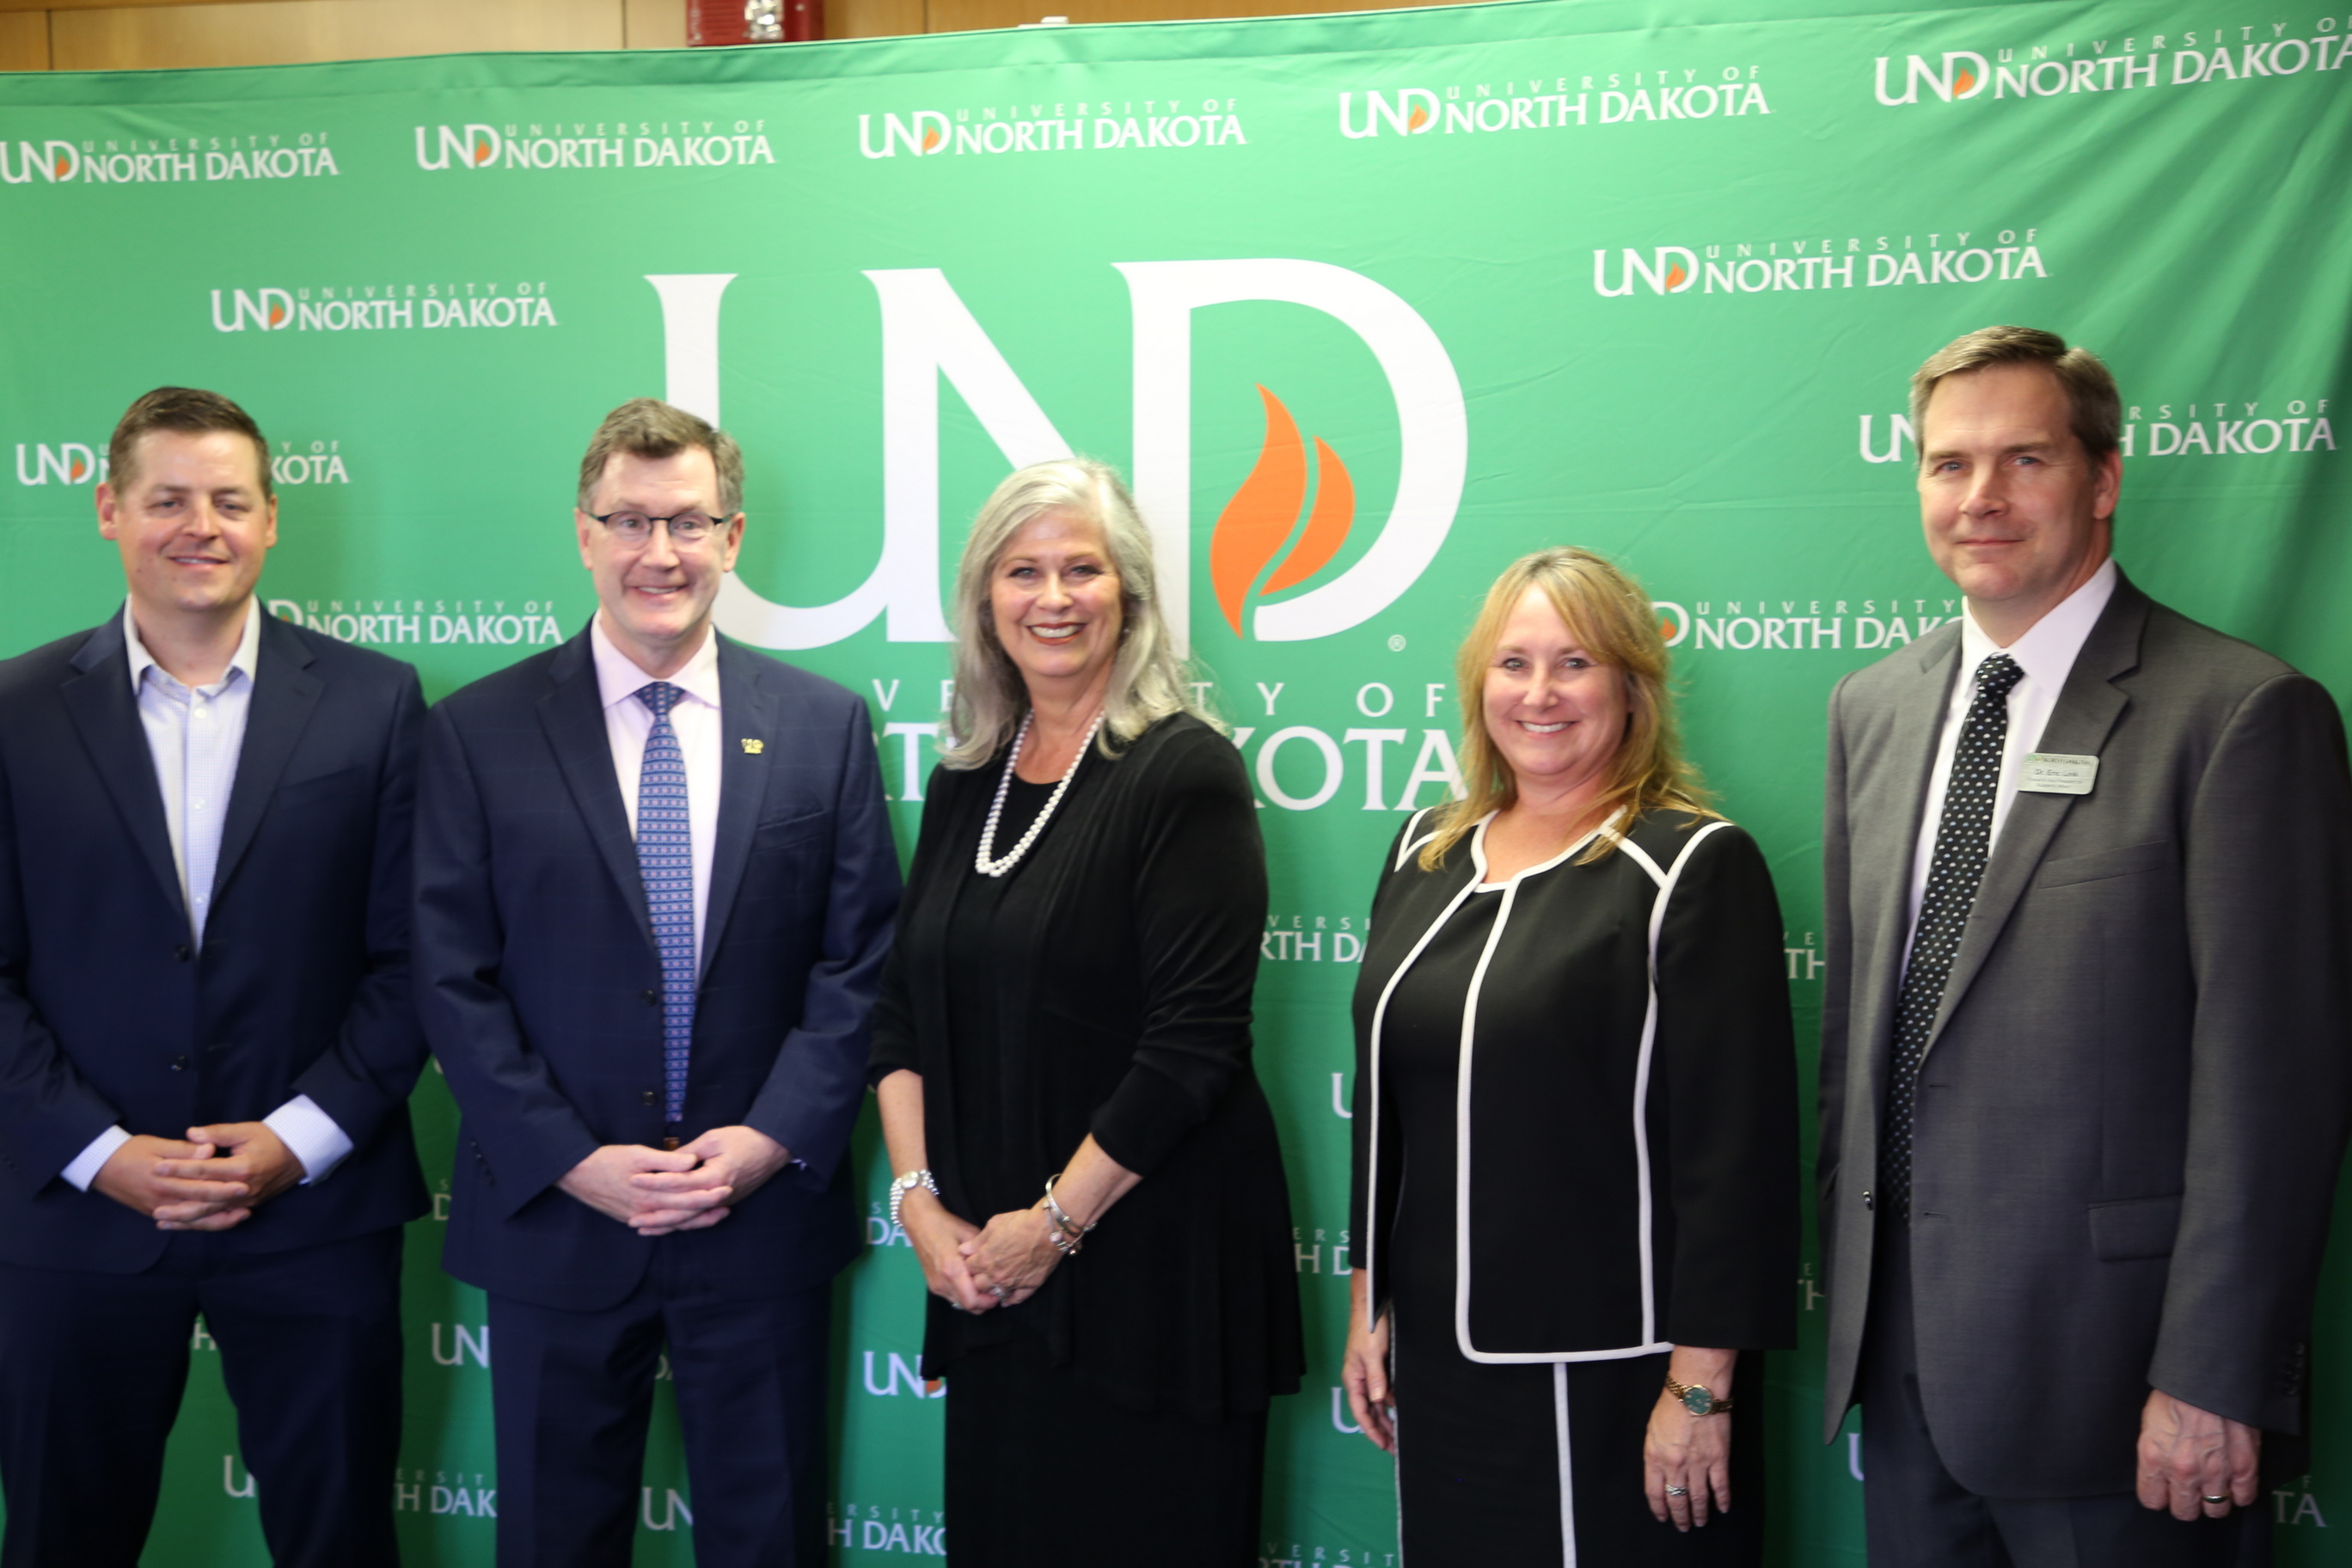 from left, they are Brian Tande, dean, UND College of Engineering & Mines; President Armacost; President Mankey; Agnes Caldwell, academic dean and VP for academic affairs at Defiance; and Eric Link, provost and vice-president for academic affairs at UND